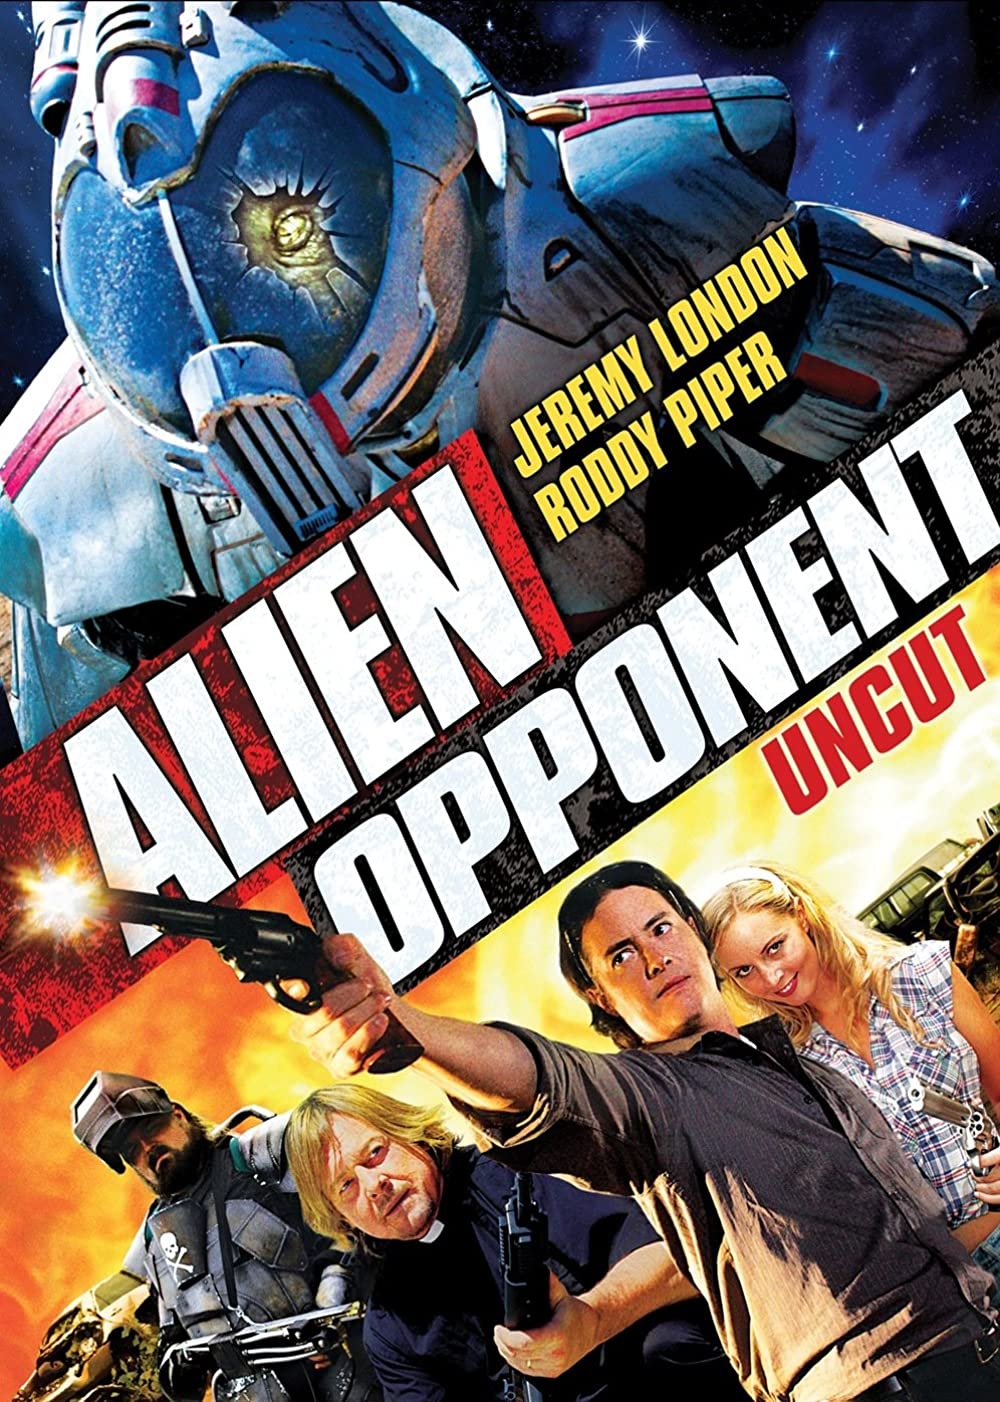 Alien Opponent 2010 Hindi ORG Dual Audio 480p UNCUT BluRay 310MB Download